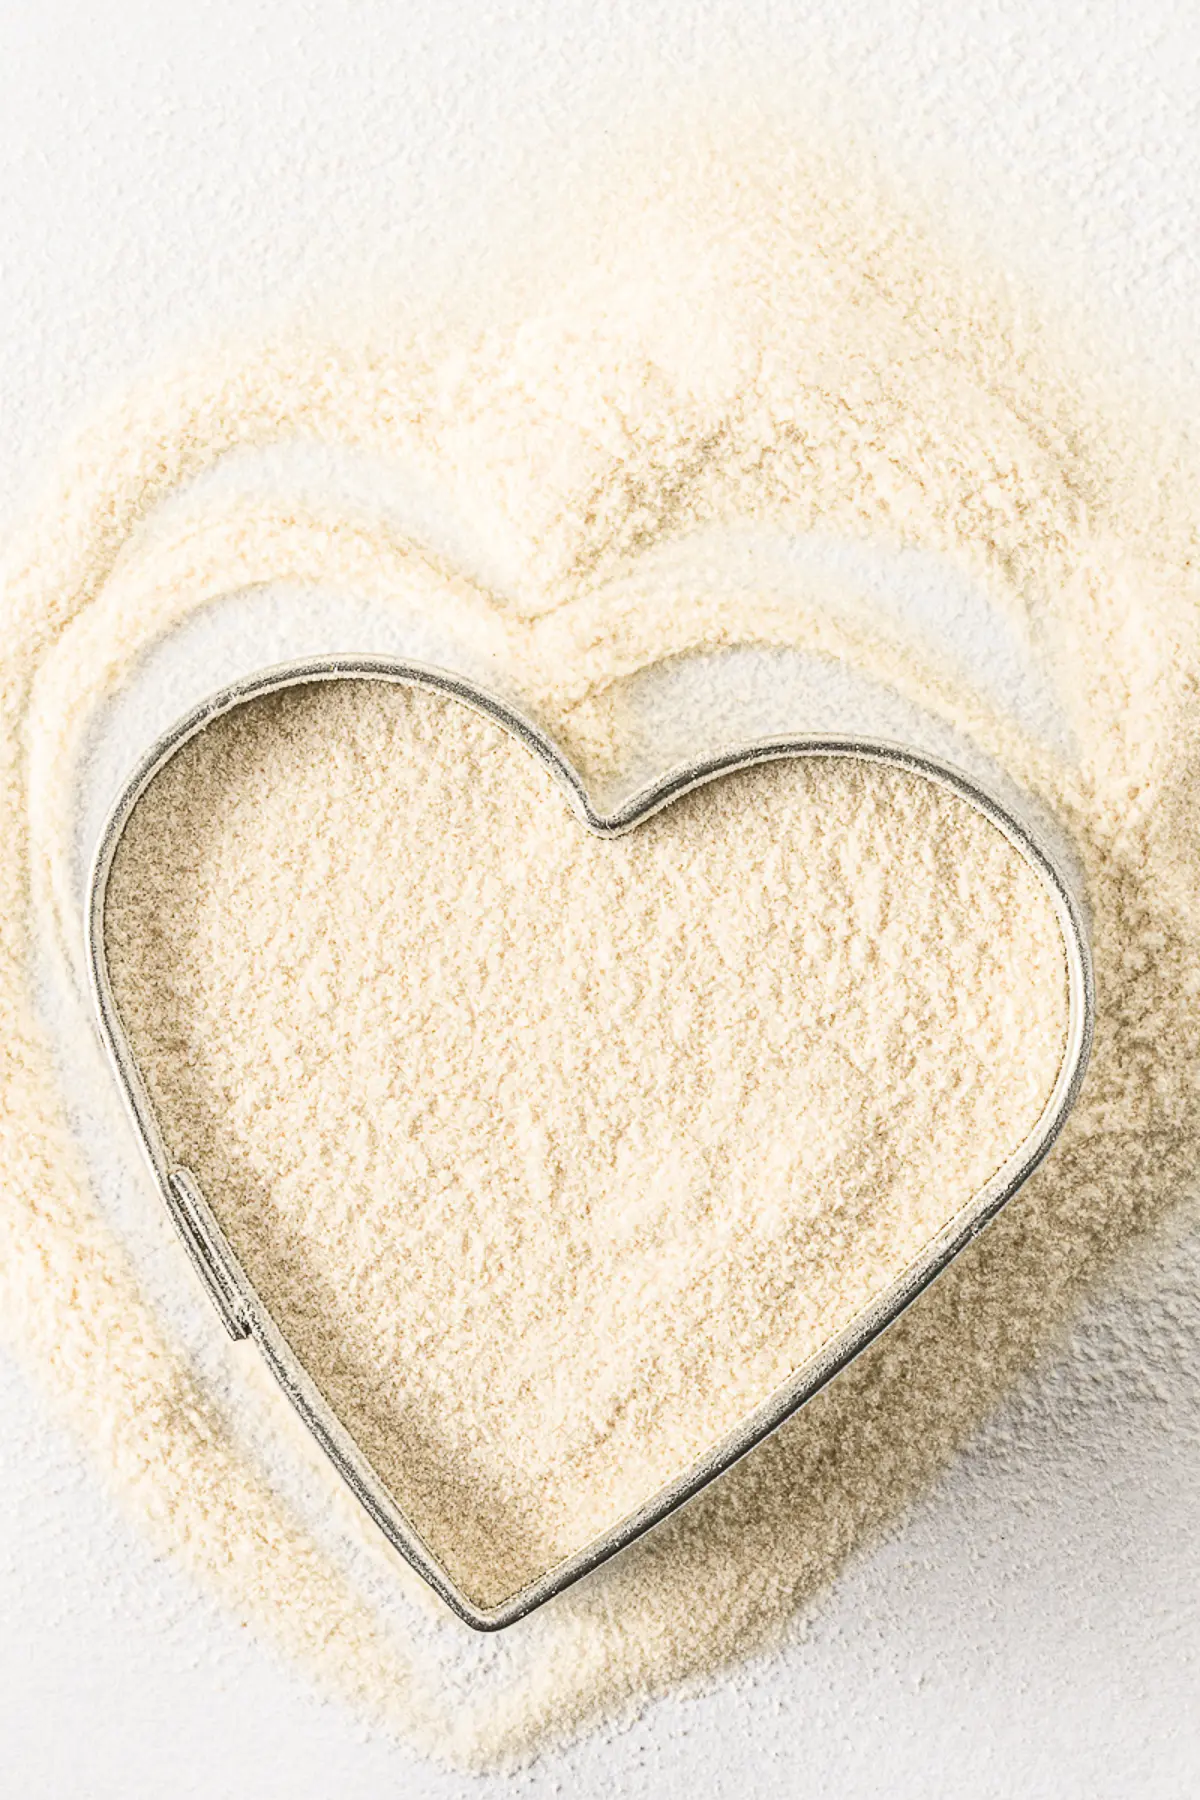 Xanthan gum spread on a bright white table with a silver heart cookie cutter.  